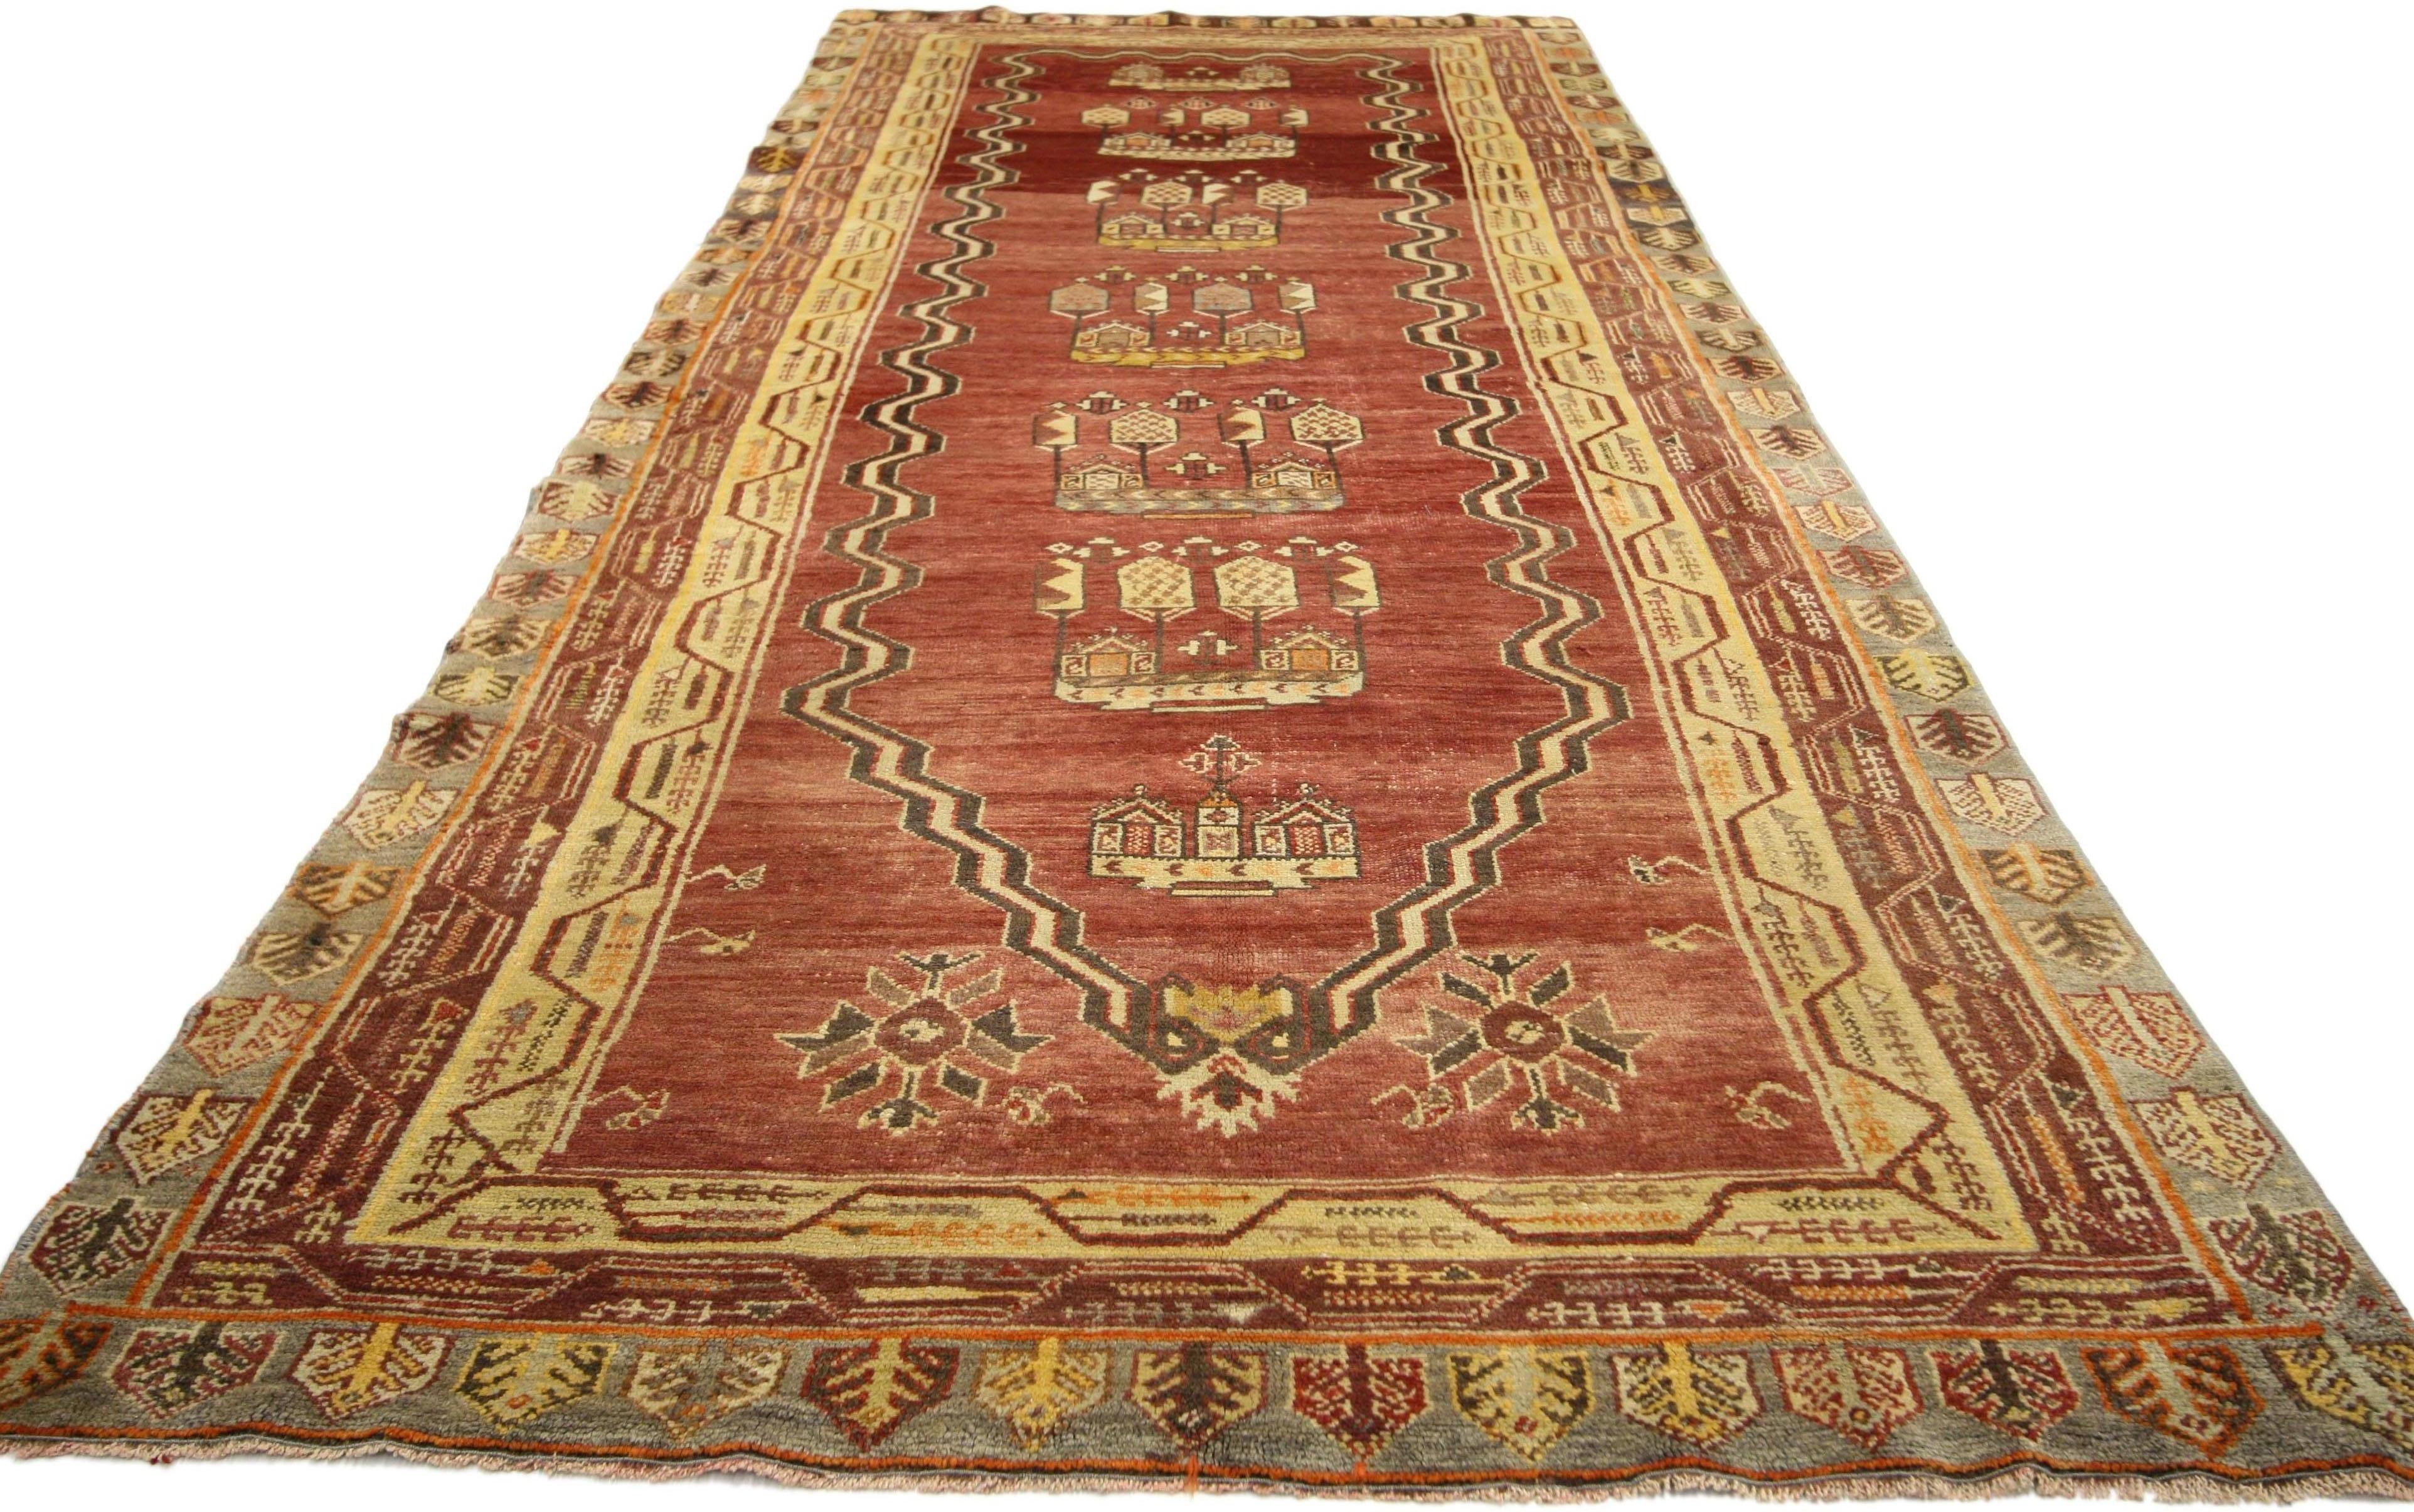 52350 Vintage Anatolian Kirsehir Village Prayer Rug with Graveyard Marker Design, Modern Style Wide Hallway Runner 04'00 x 10'03 From Esmaili Rugs Collection. This hand-knotted wool vintage Turkish Oushak runner features a mihrab, or prayer niche,